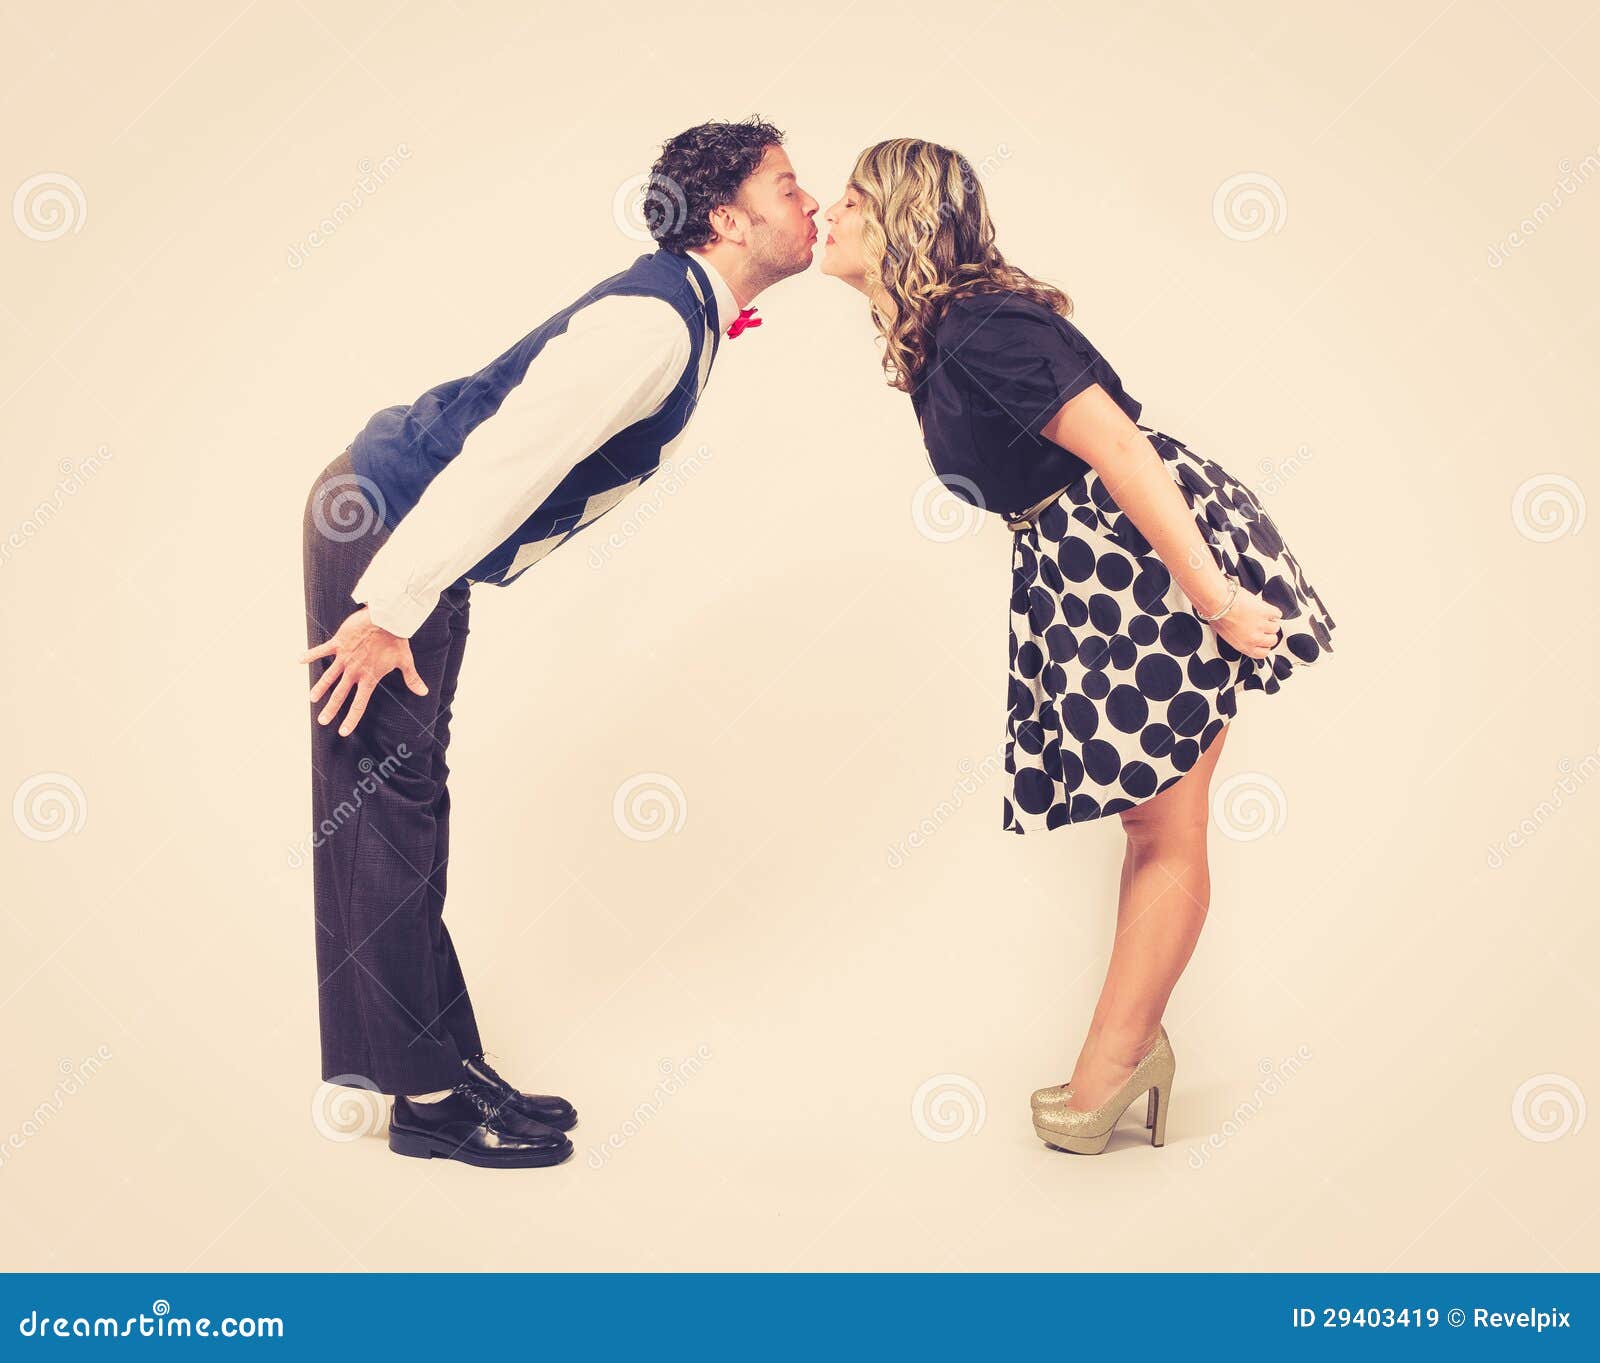 Top 92+ Images how to lean in for a kiss Updated